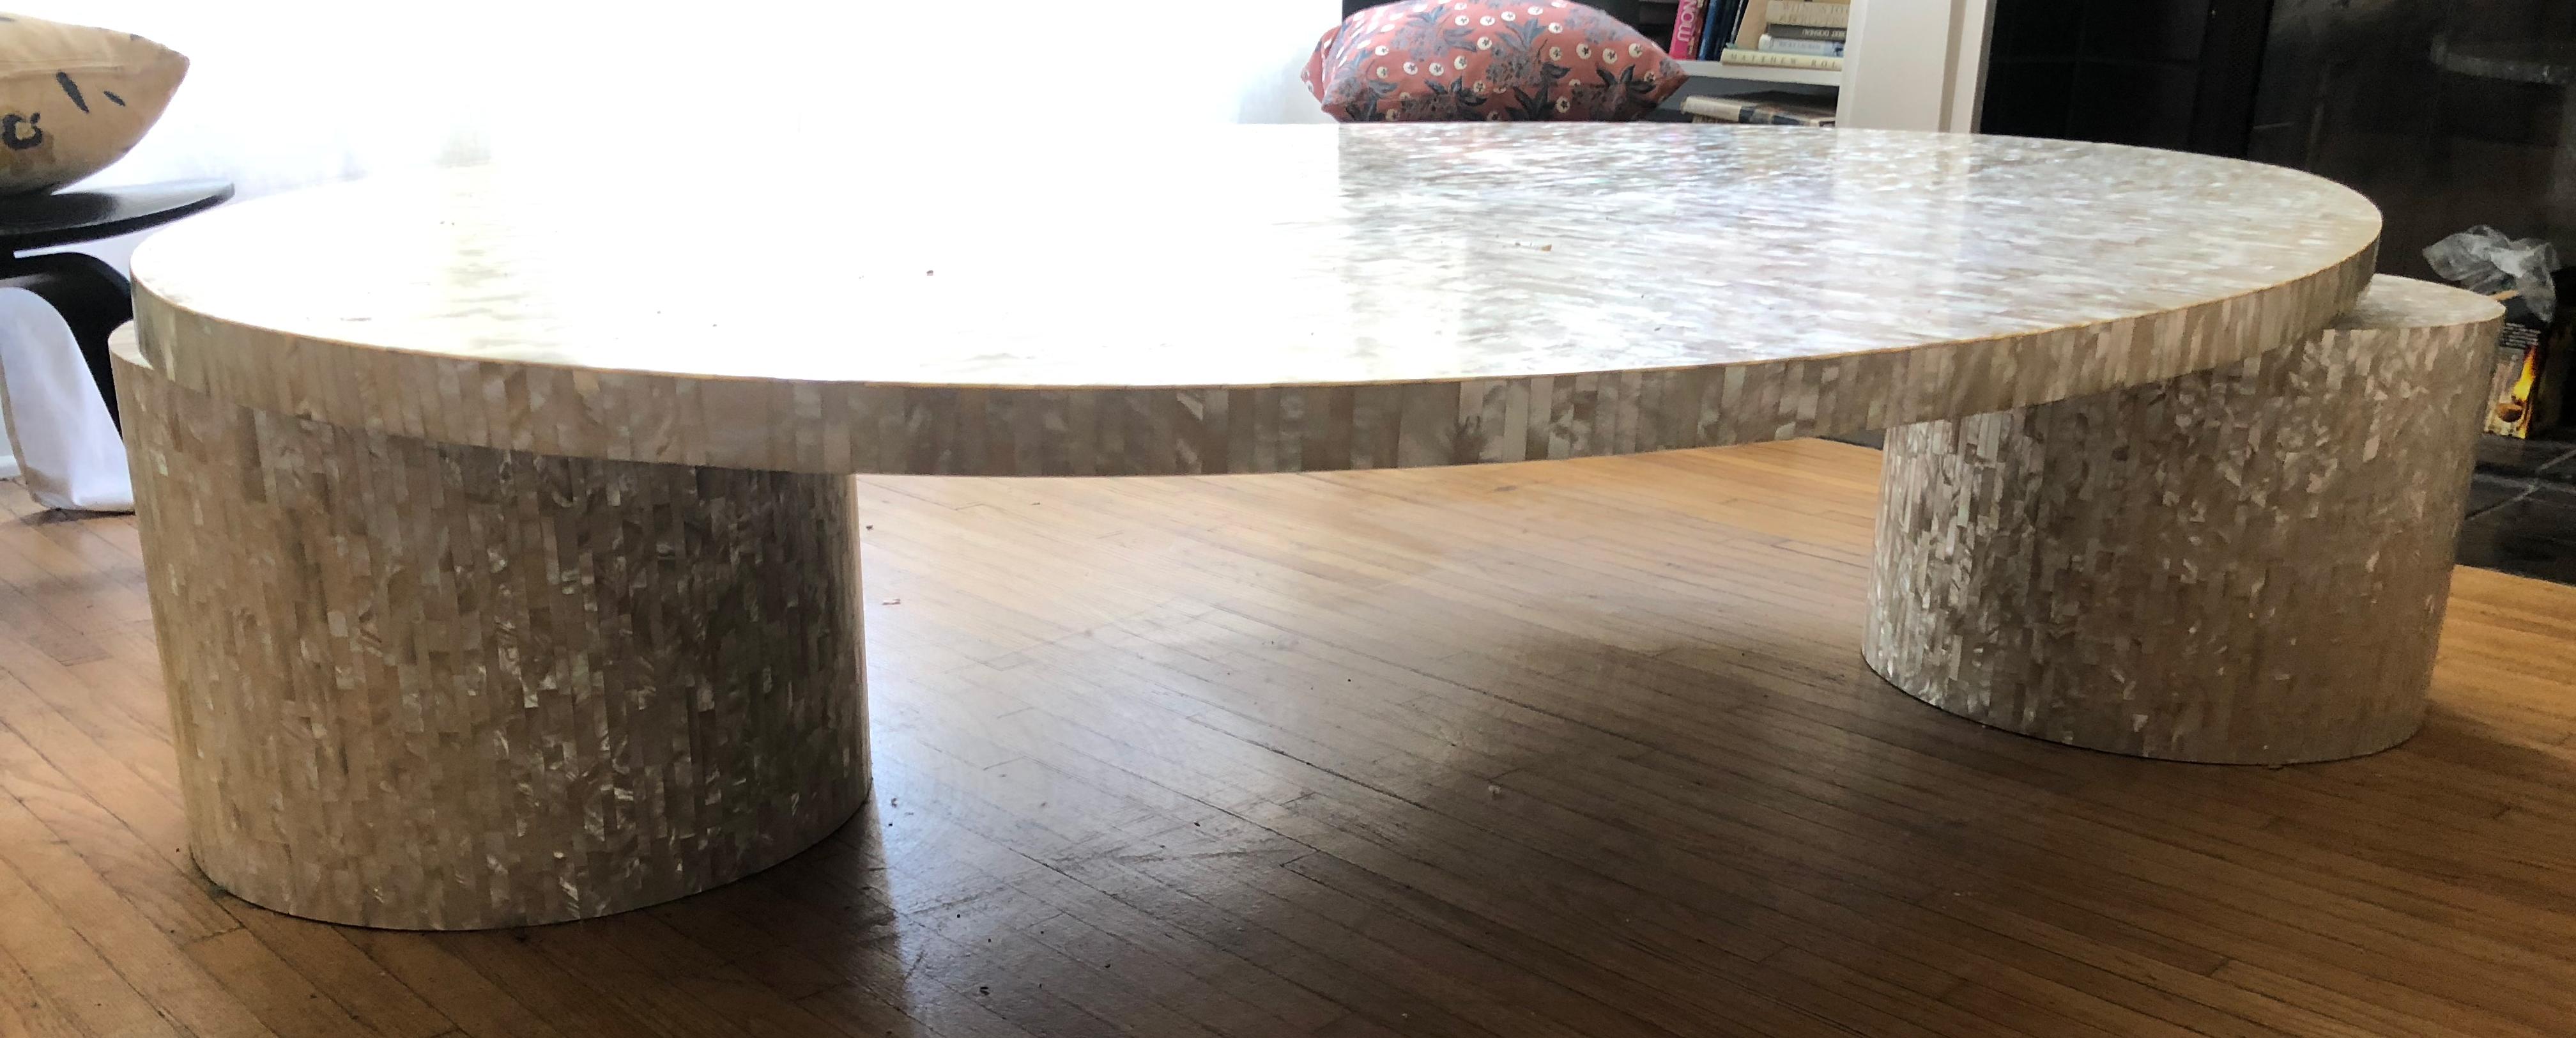 Splendid unique Memphis style mother of pearl coffee table In Excellent Condition For Sale In Culver City, CA